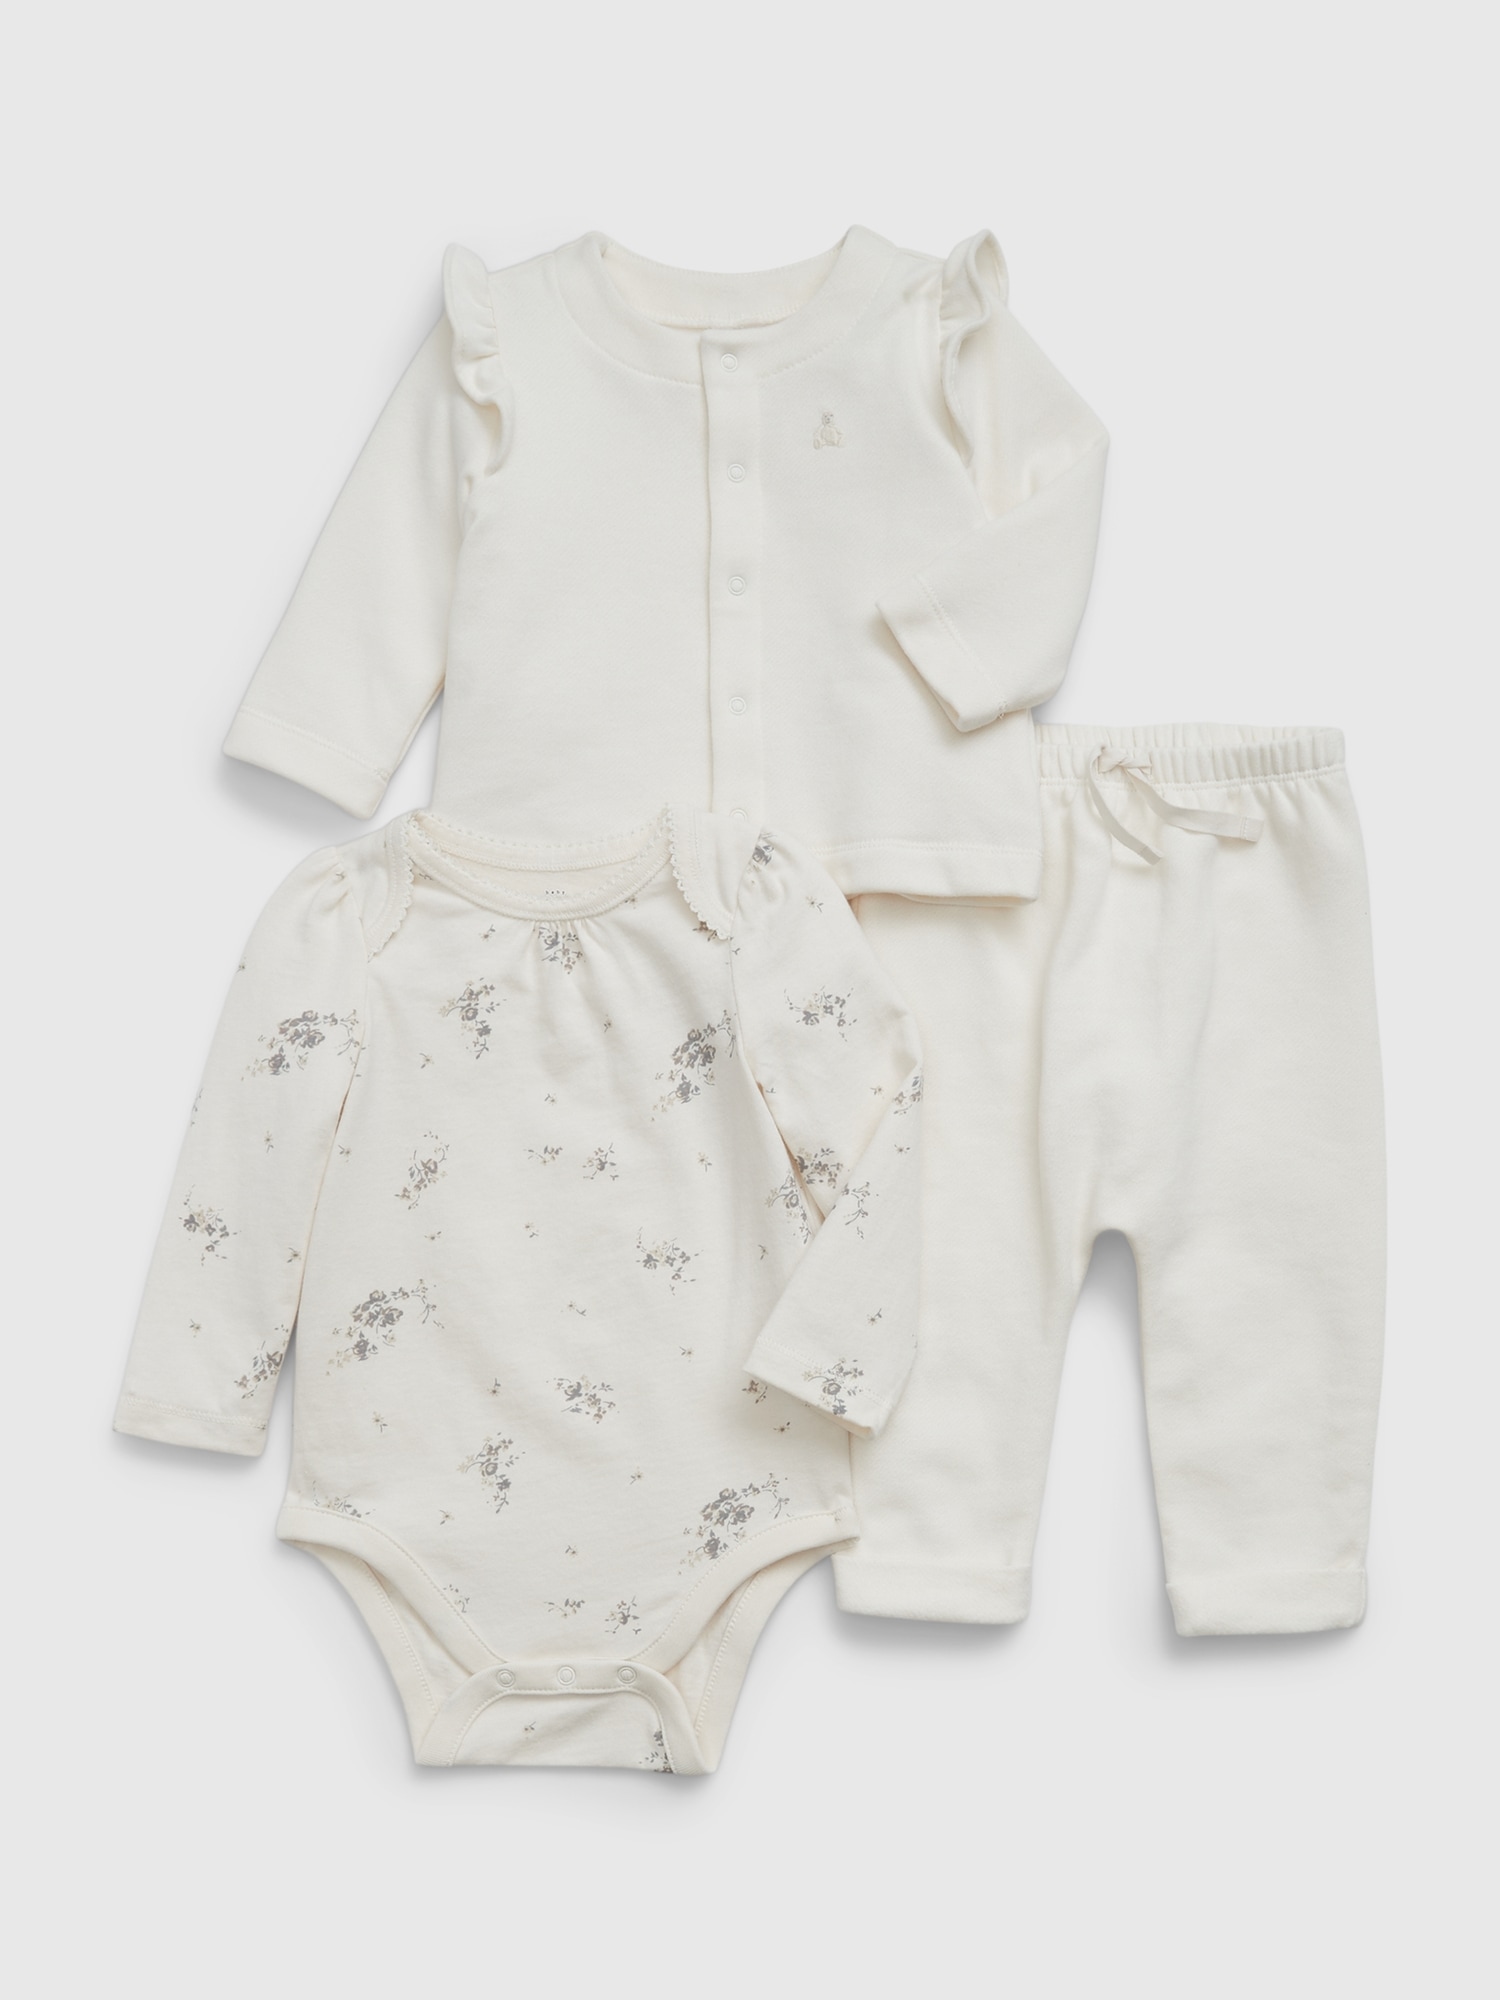 Gap Baby First Favorites Three-Piece Outfit Set